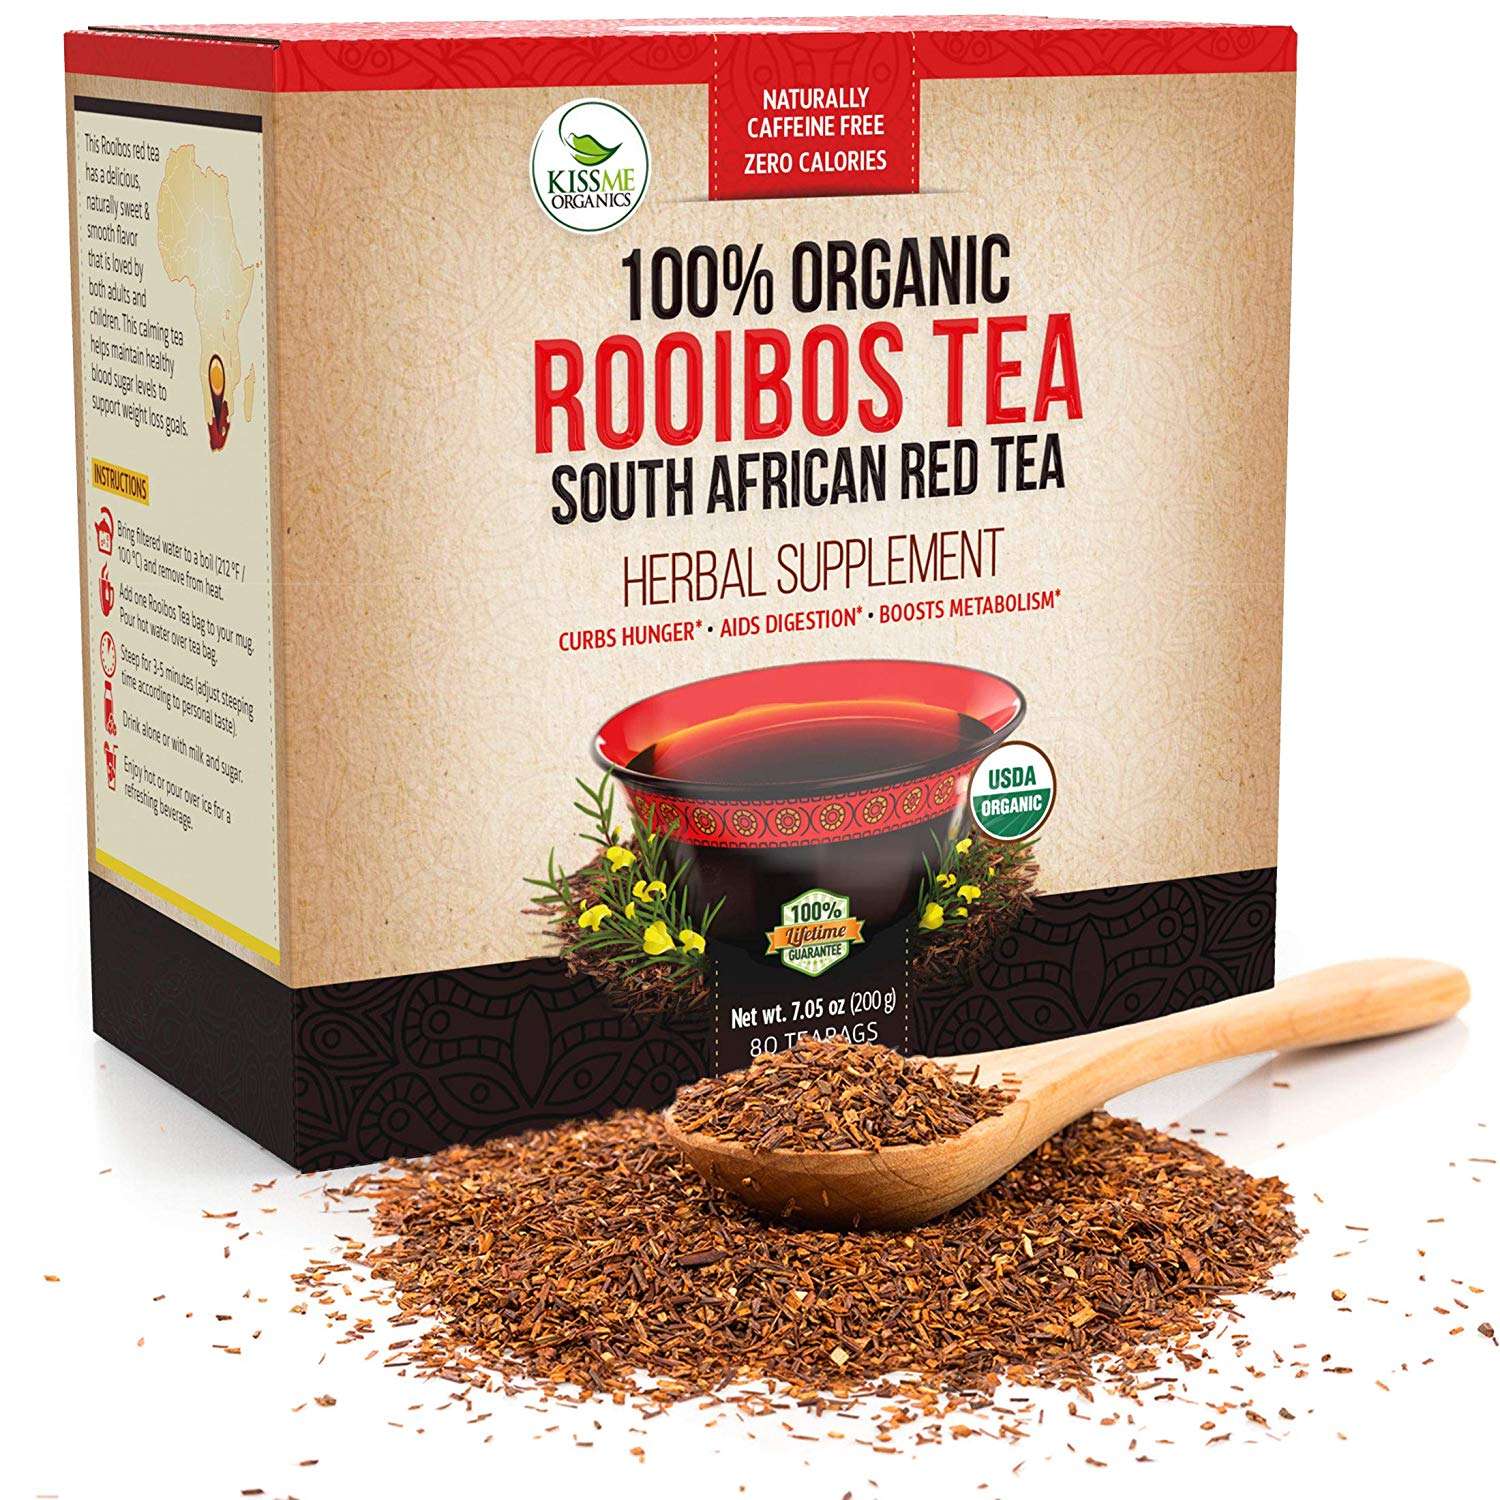 7 Best Rooibos Tea Brands You Can Buy And Their Detailed ...